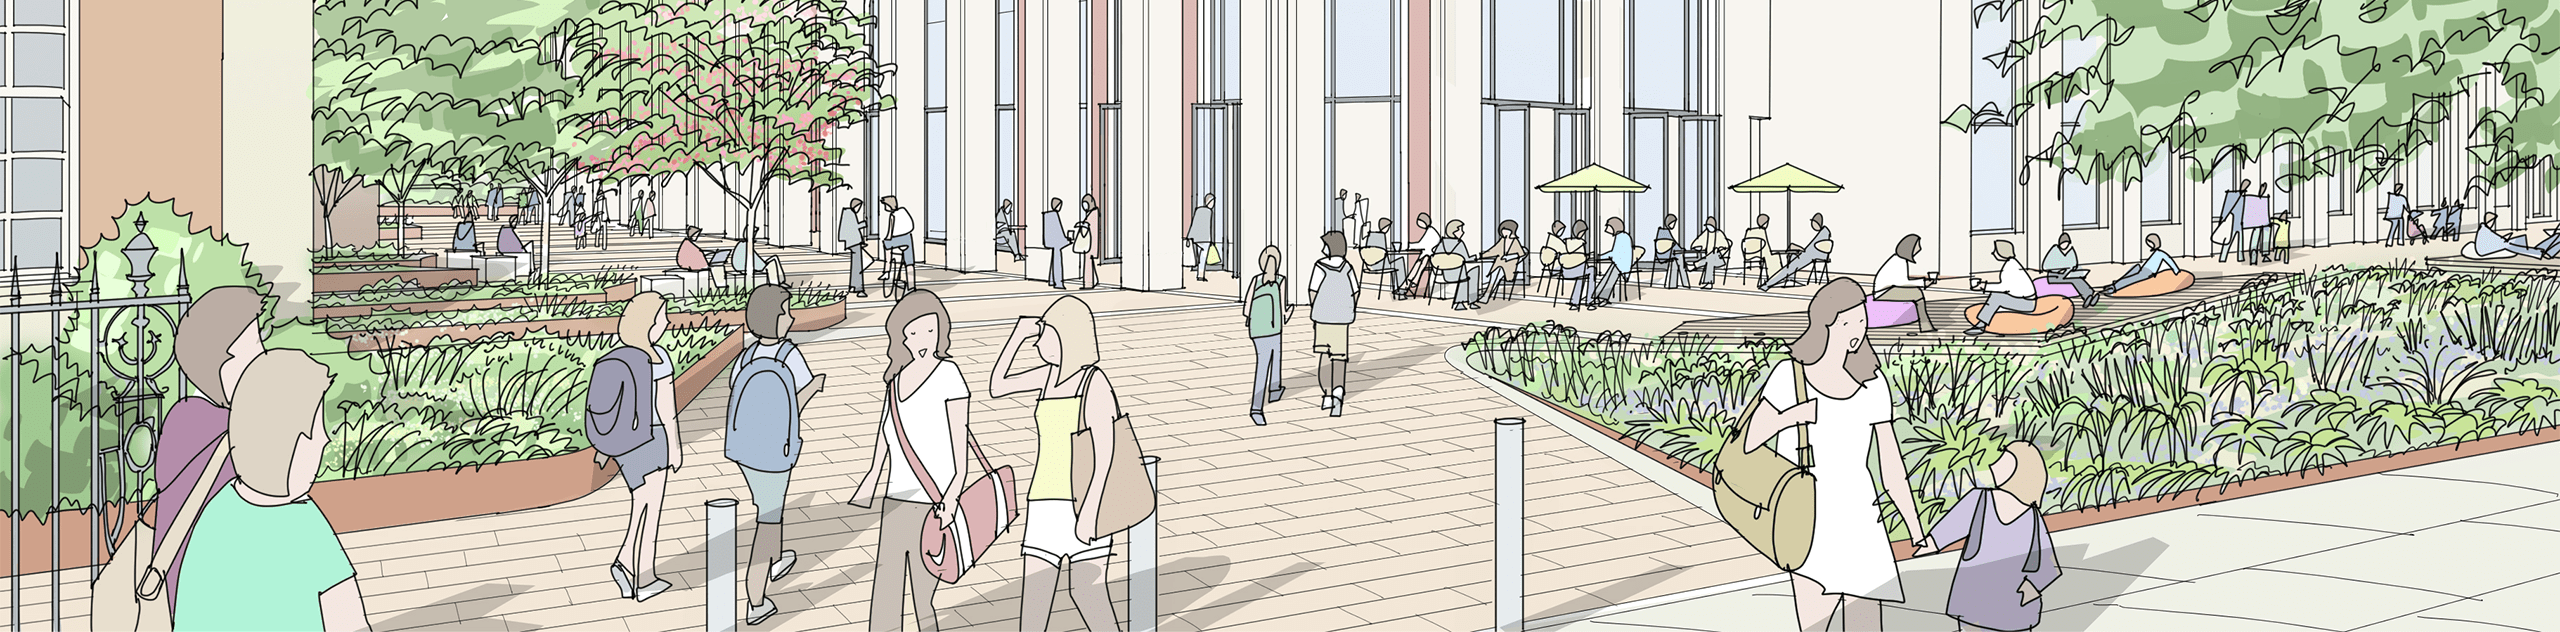 A sketch view of the spill-out cafe space with trees and shrubs in raised planters. © BMD & James Holyoak